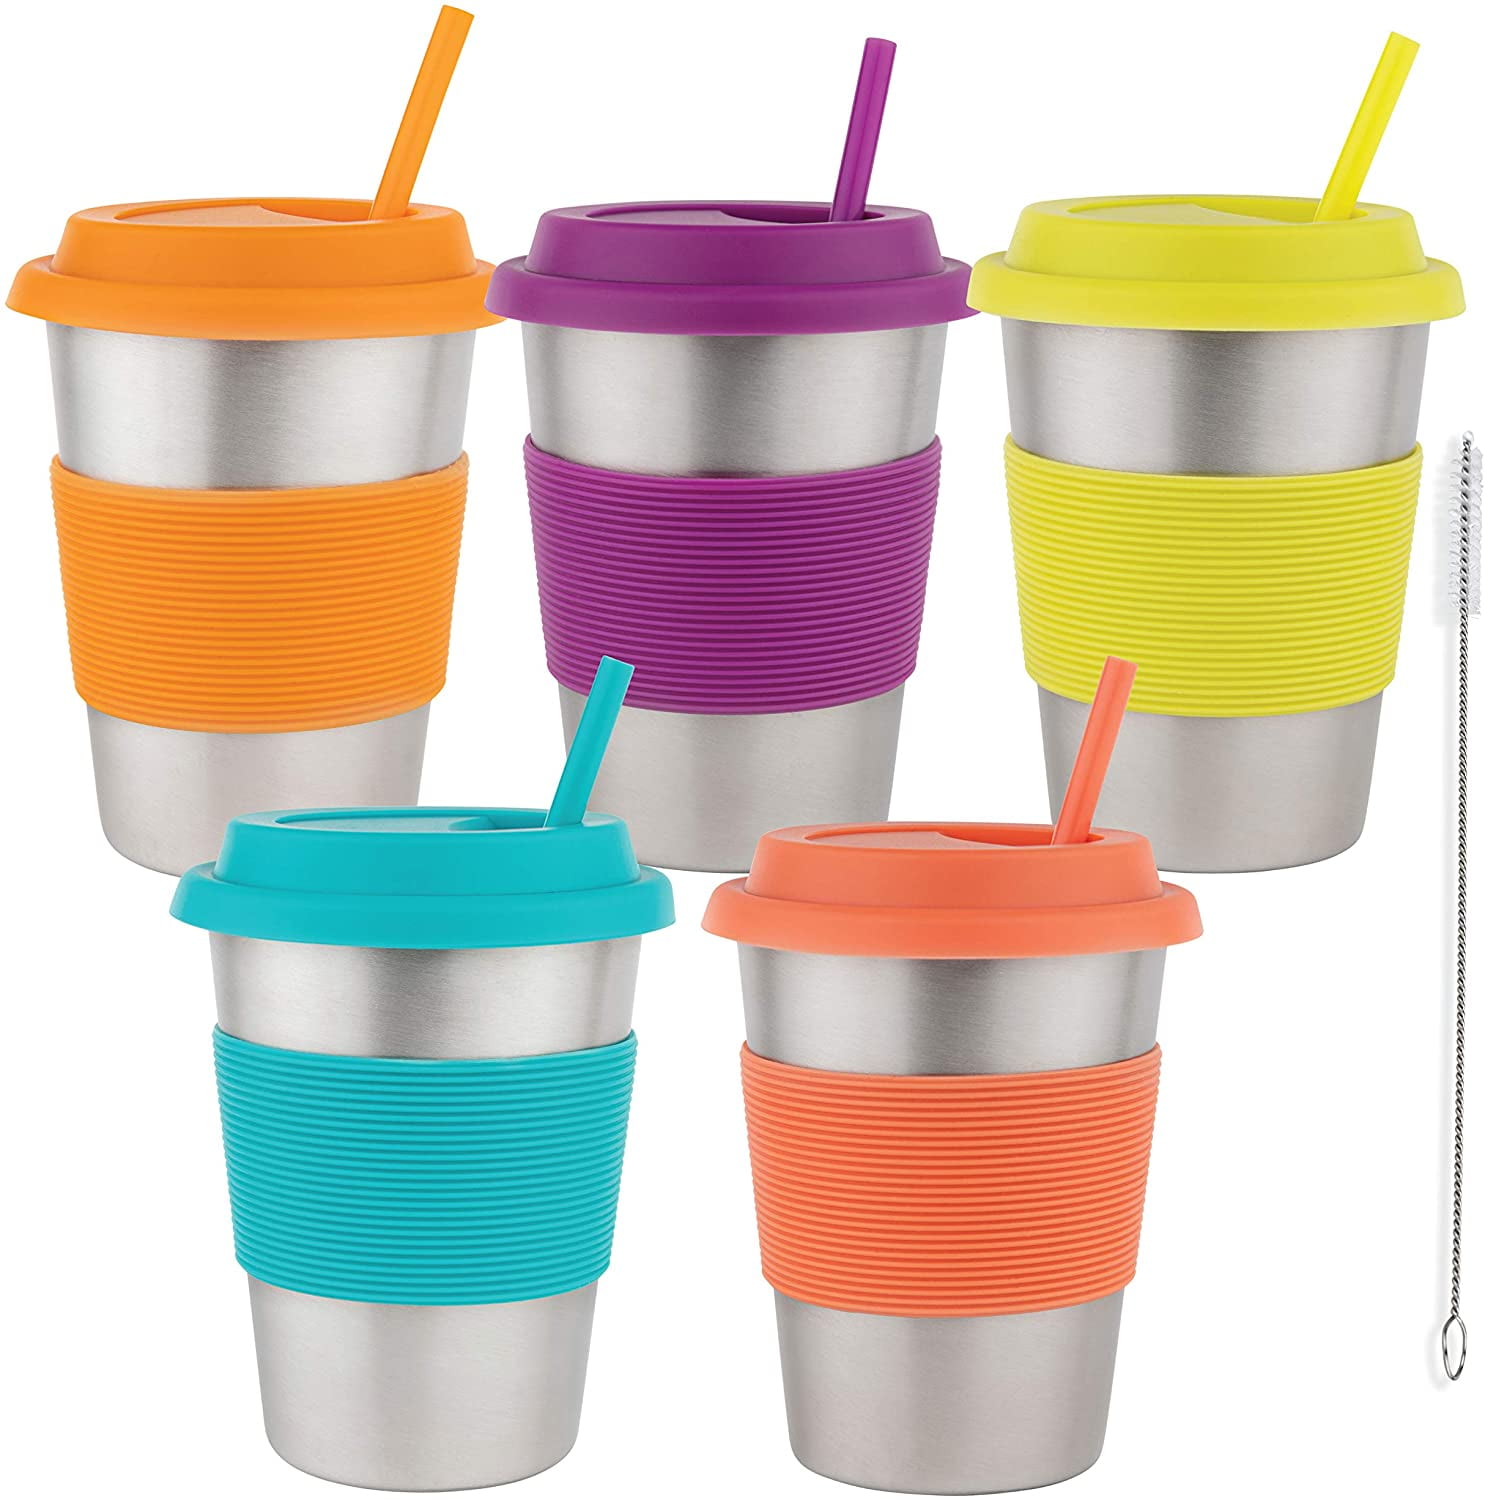 Homeries Kids Stainless Steel Cups Tumbler with Silicone Lid & Straws 12 Oz  (Set of 5), Ecofriendly Drinking Homeries Tumblers for Children, Toddlers  & Adults